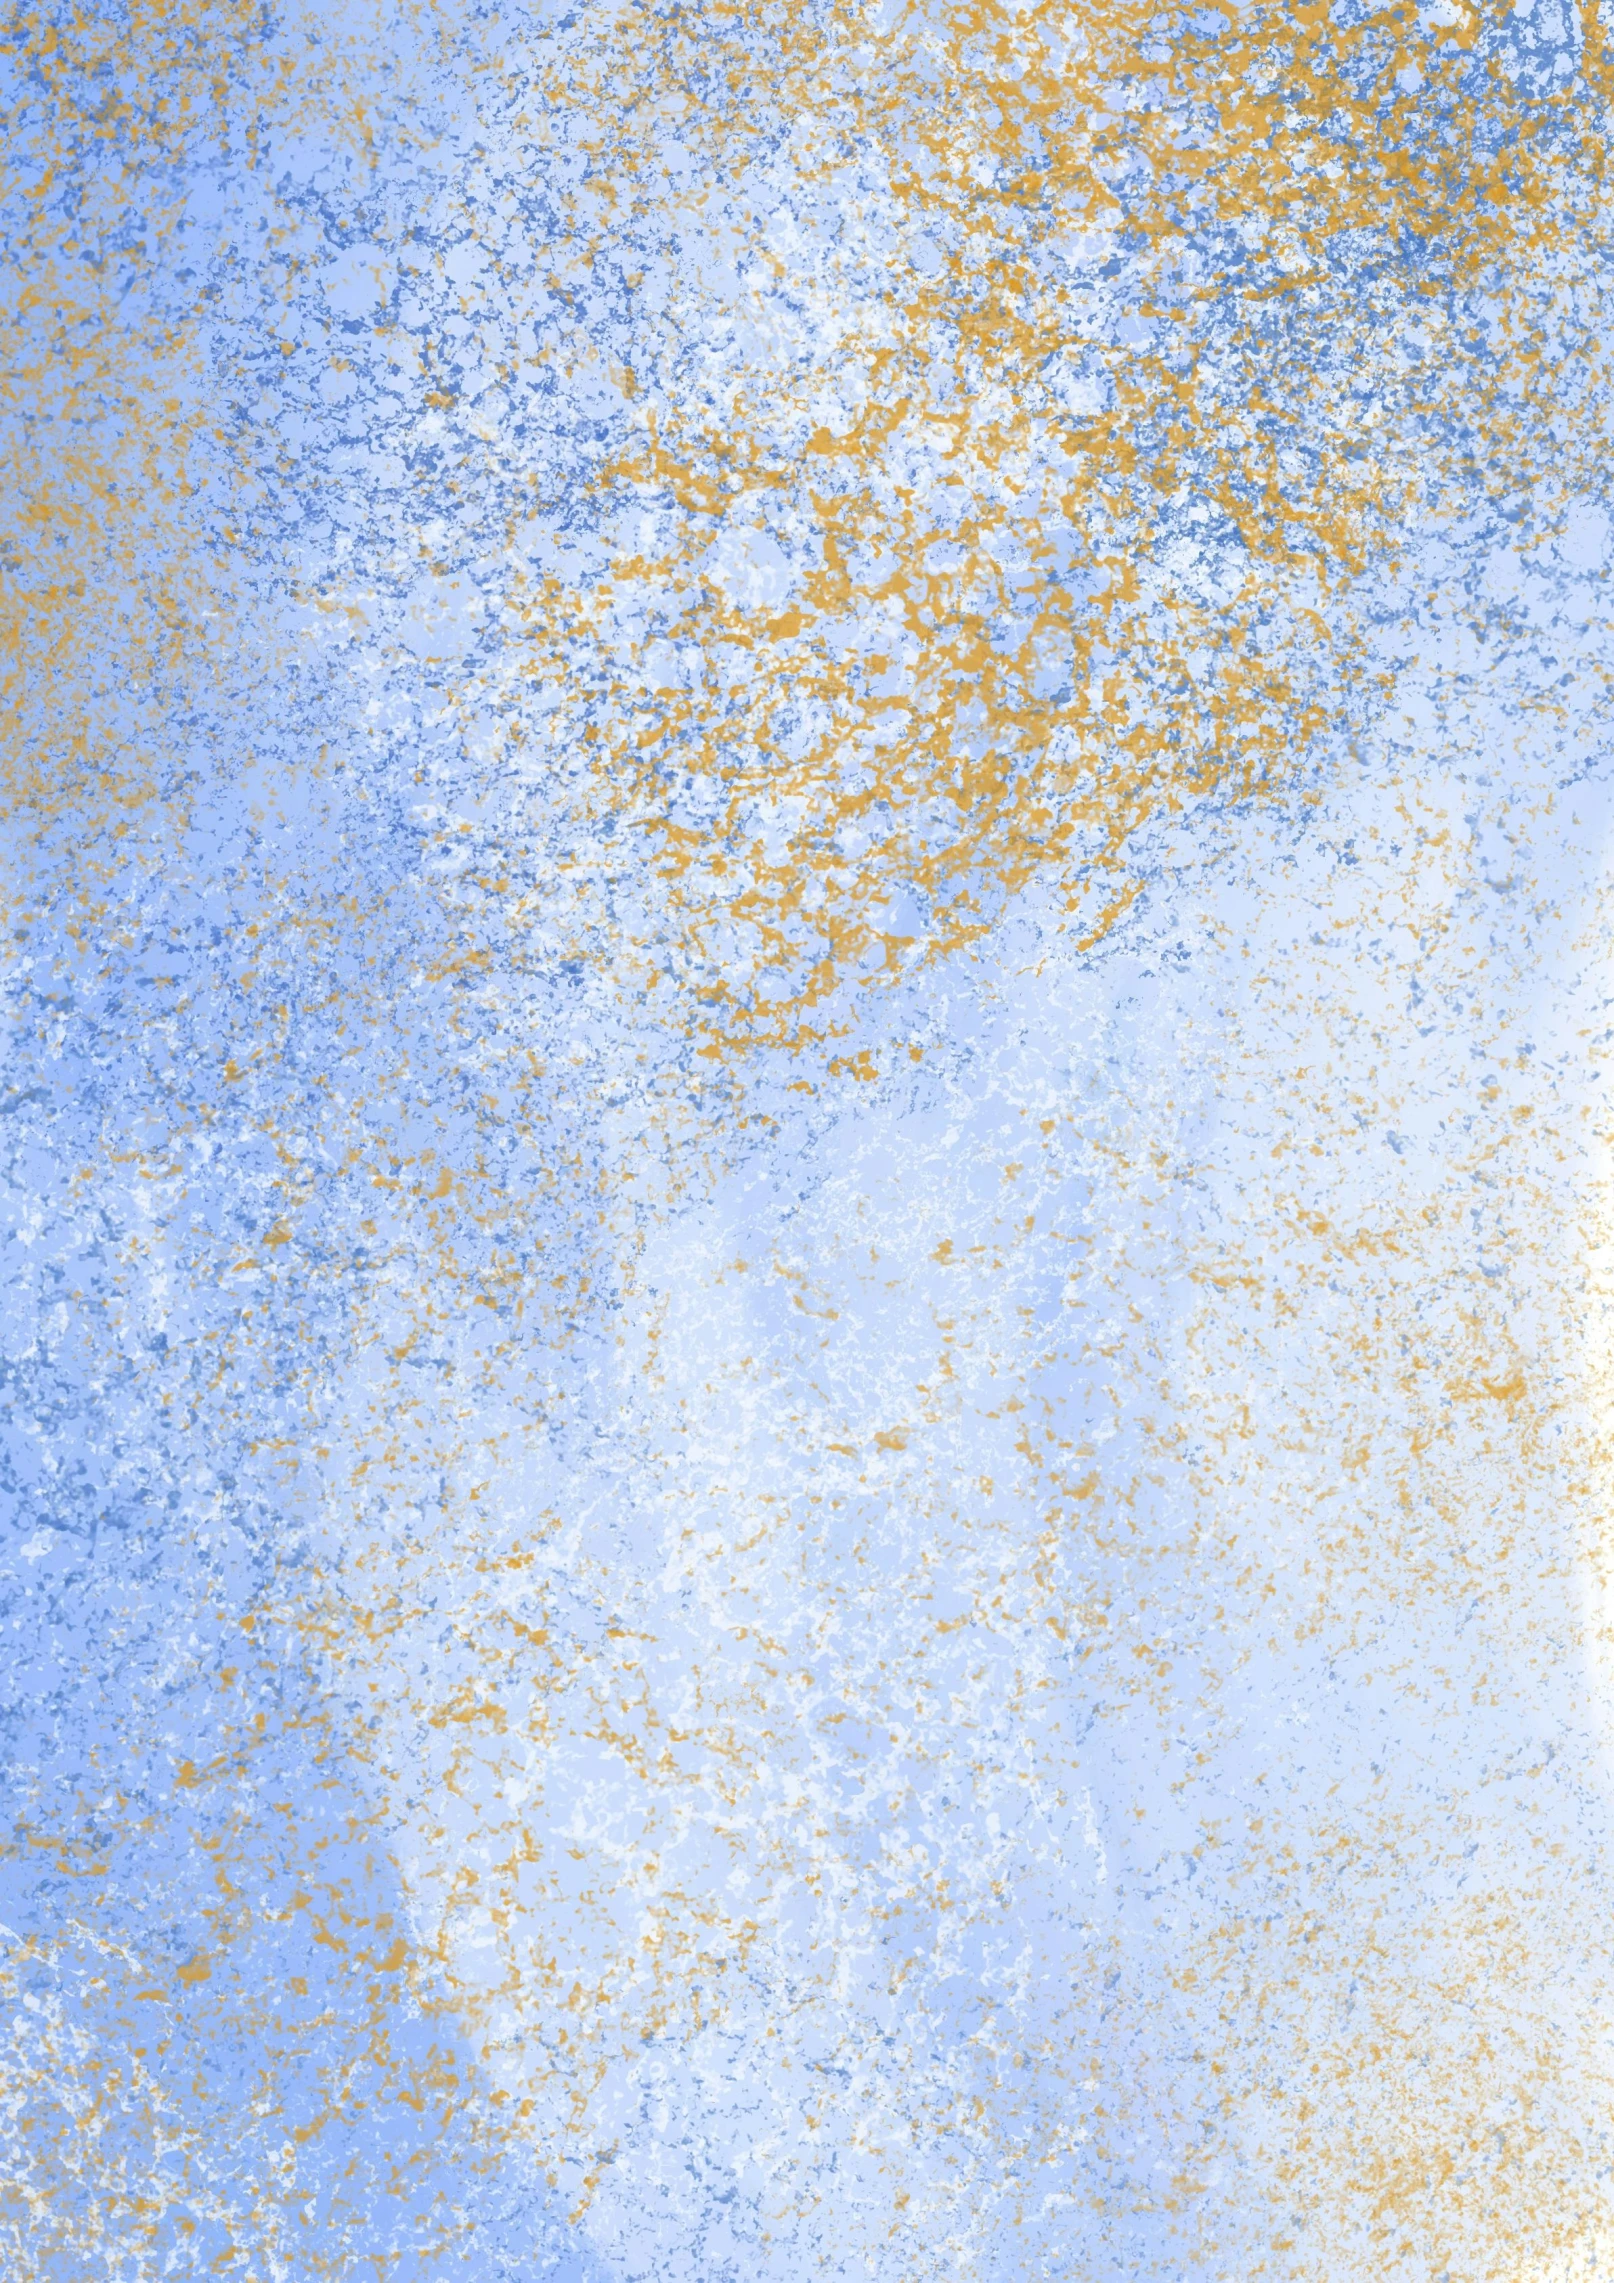 a man riding a surfboard on top of a wave, inspired by Lorentz Frölich, reddit, conceptual art, blue and gold palette, frosted texture, 2 5 6 x 2 5 6 pixels, abstract paint color splotches